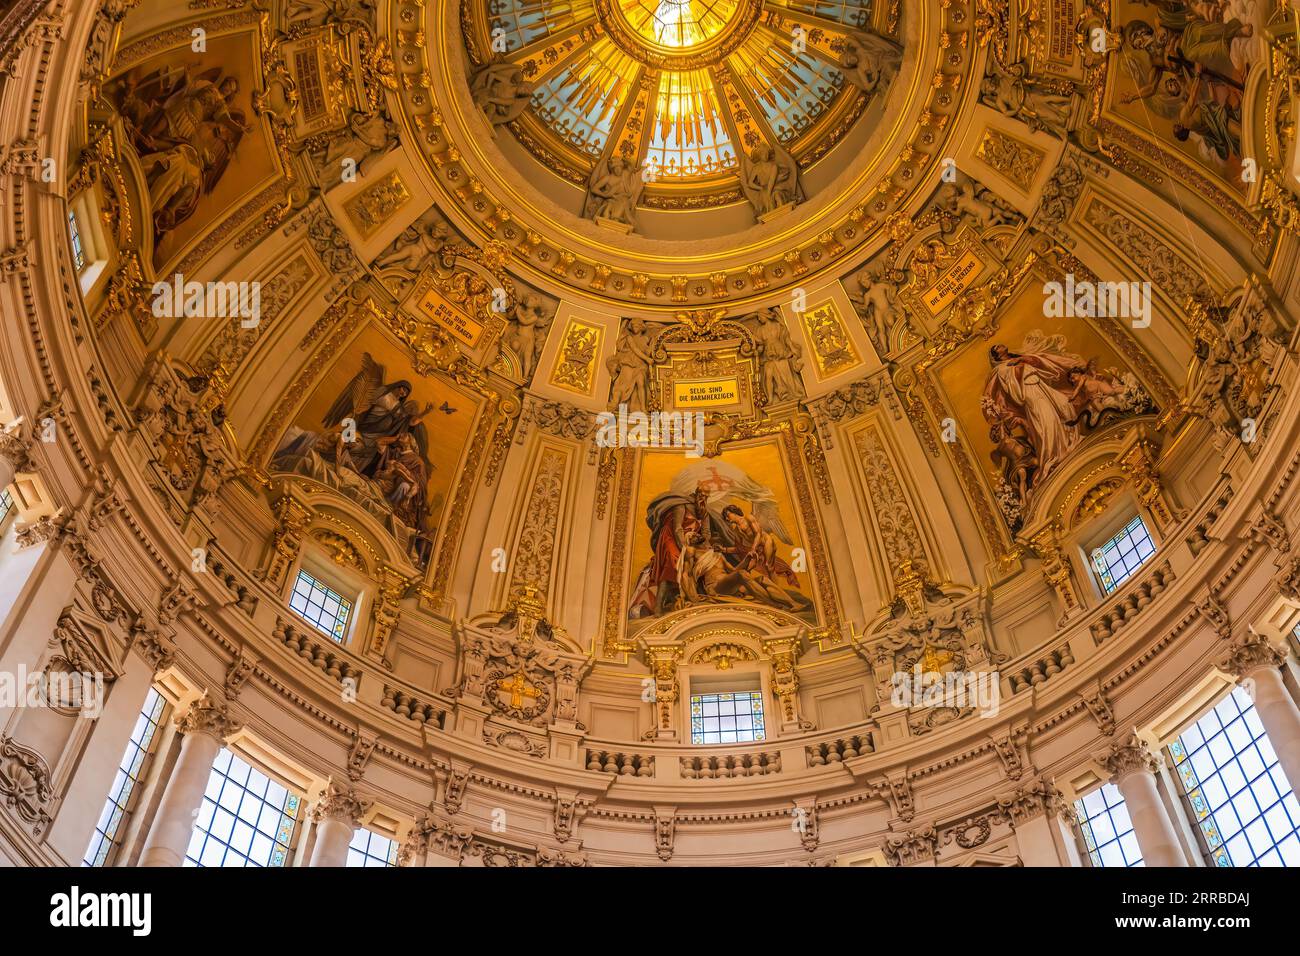 Dome Stained Glass Berlin Cathedral Berliner Dom Berlin Germany. Cathedral largest Protestant Church in Germany. Built between 1894 to 1905 for Kaiser Stock Photo